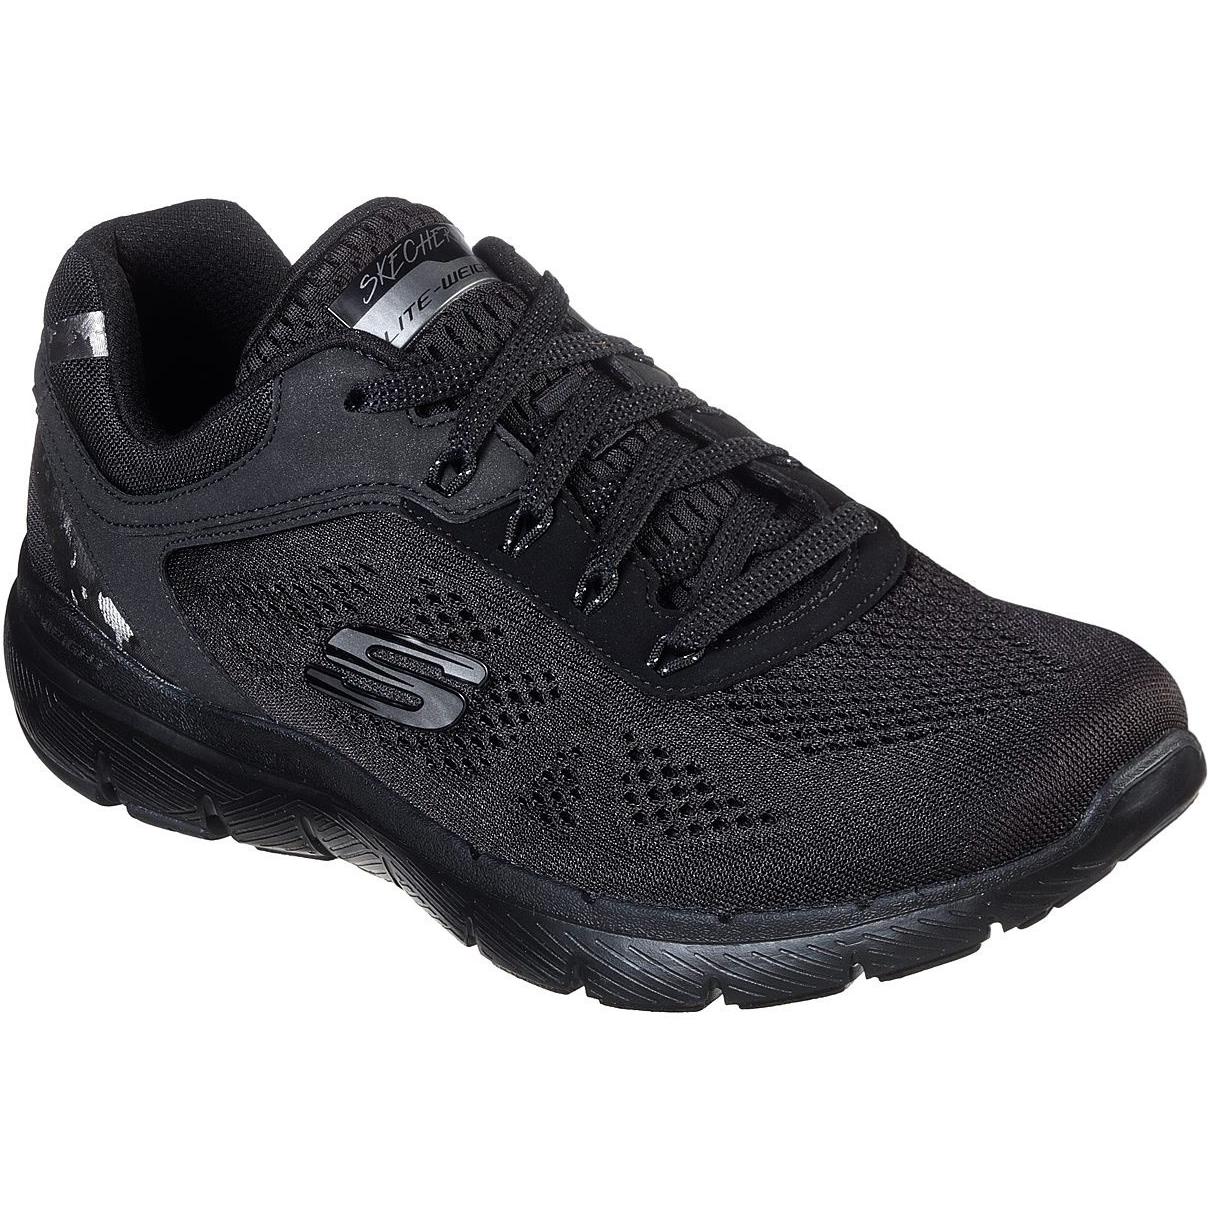 Skechers Flex Appeal 3.0 Lace Up Sports Trainers